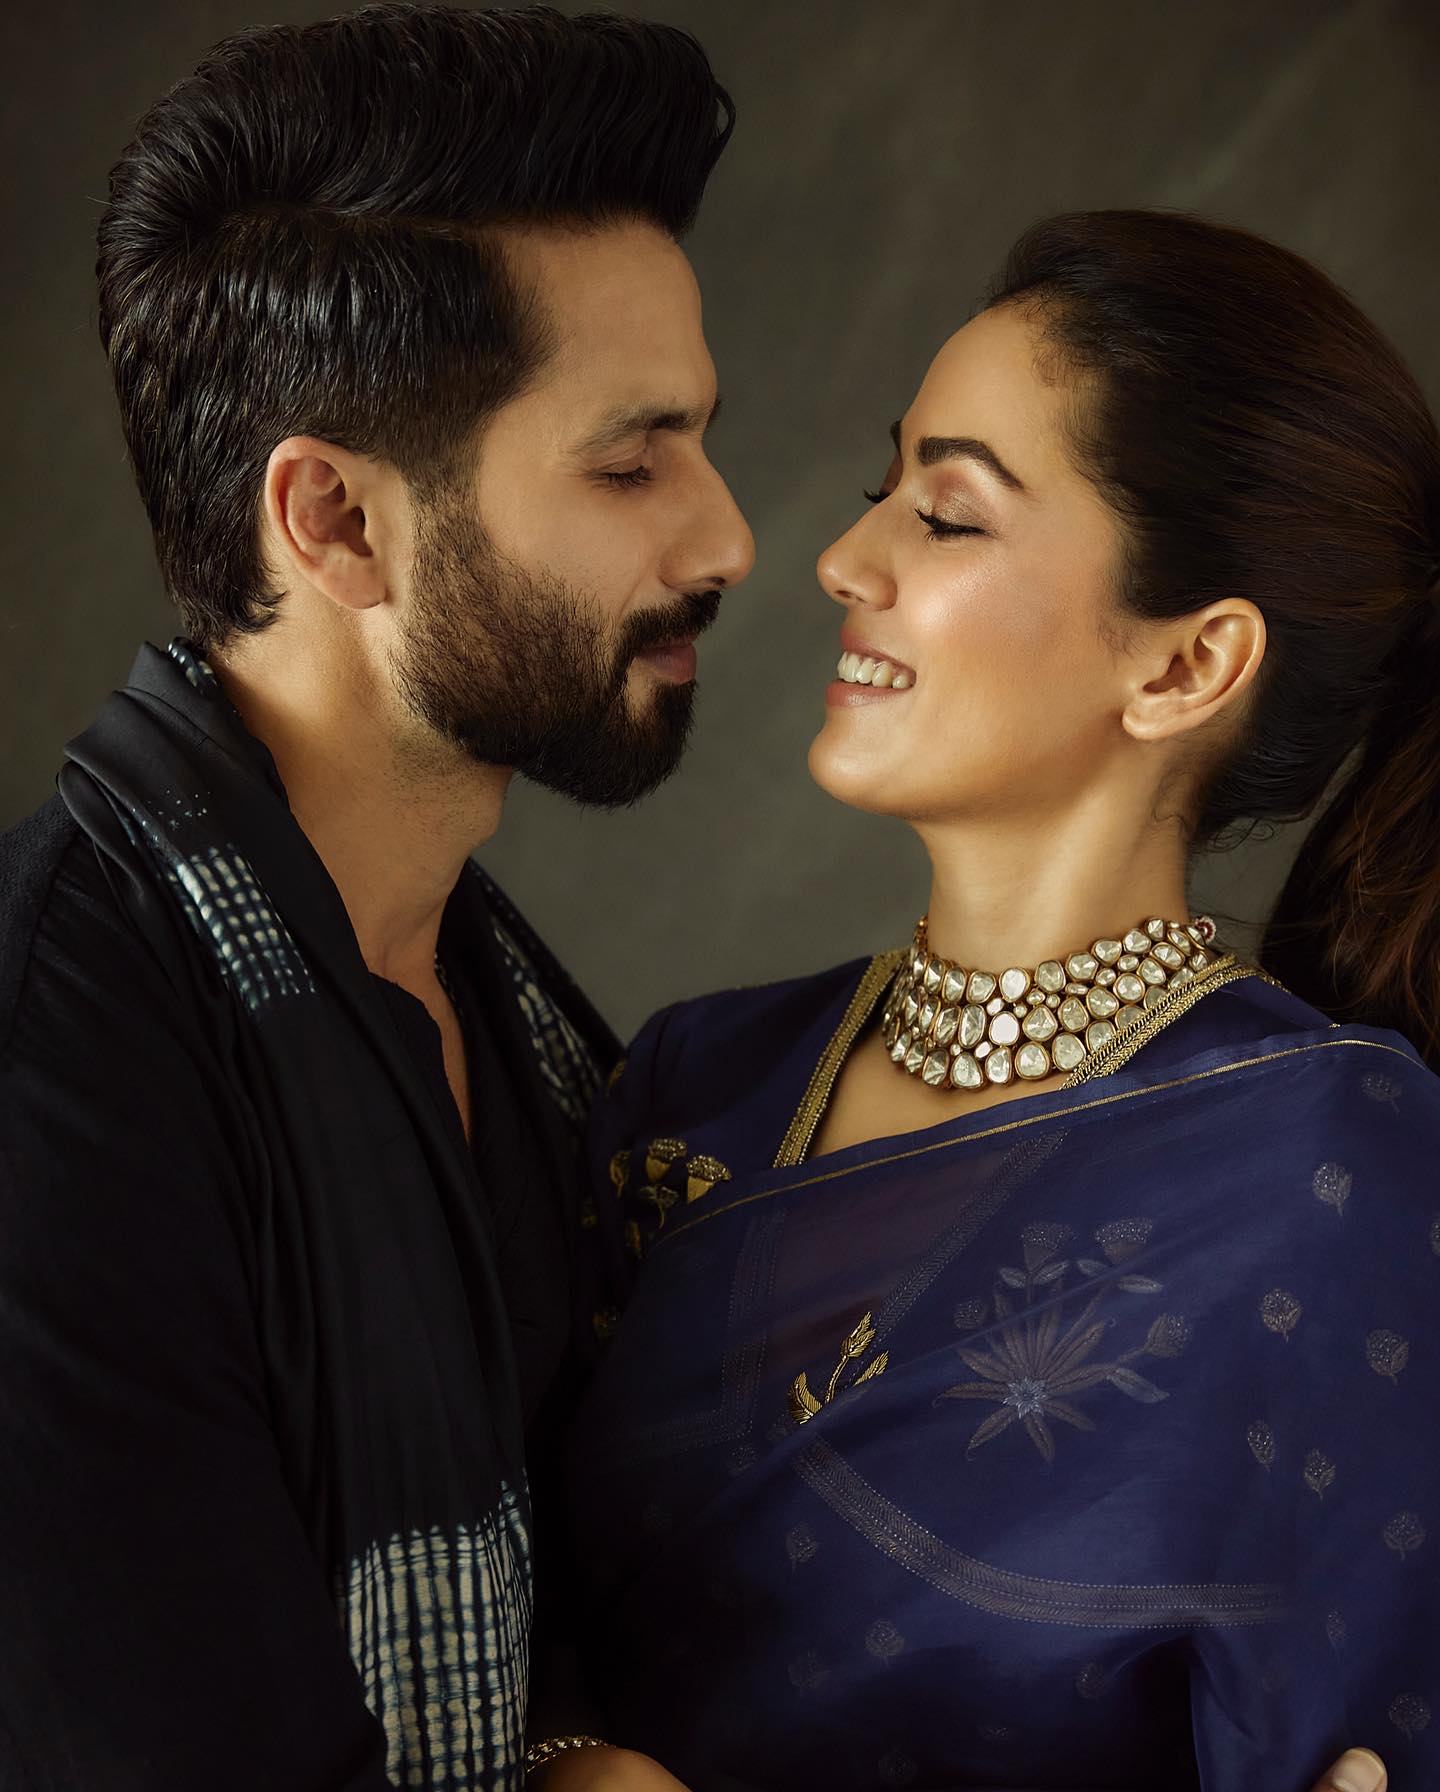 Couple Goals! Shahid Kapoor and Mira go mushy together on latter’s birthday 849594